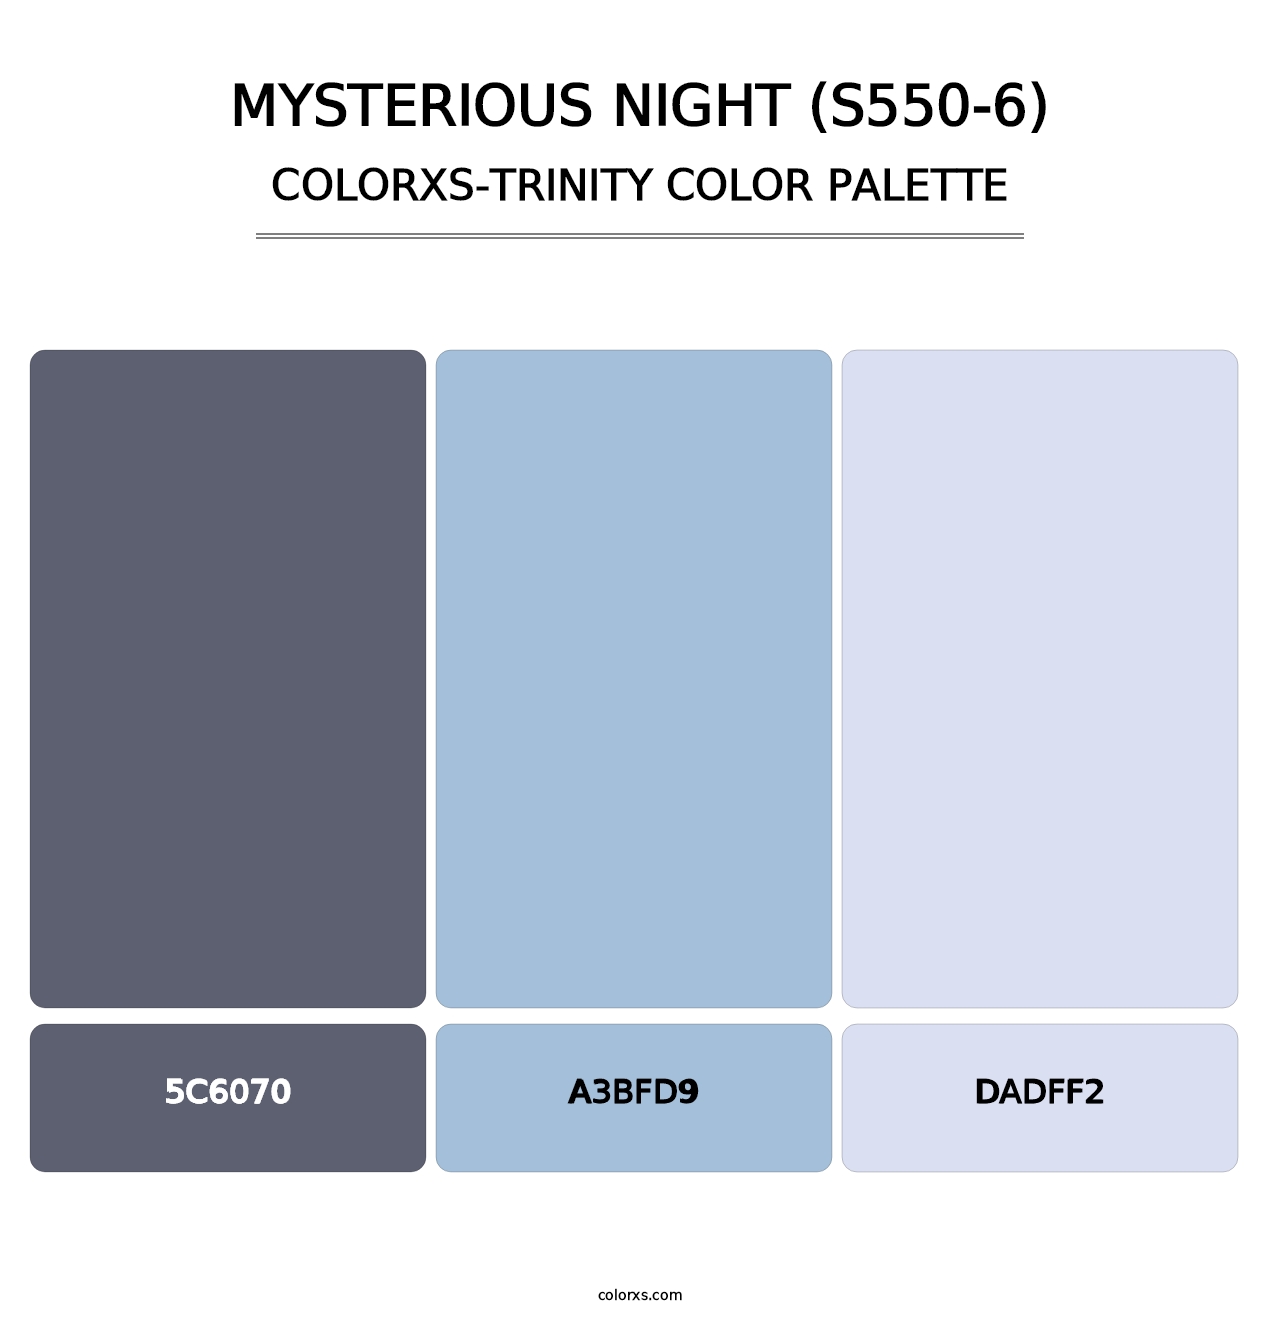 Mysterious Night (S550-6) - Colorxs Trinity Palette